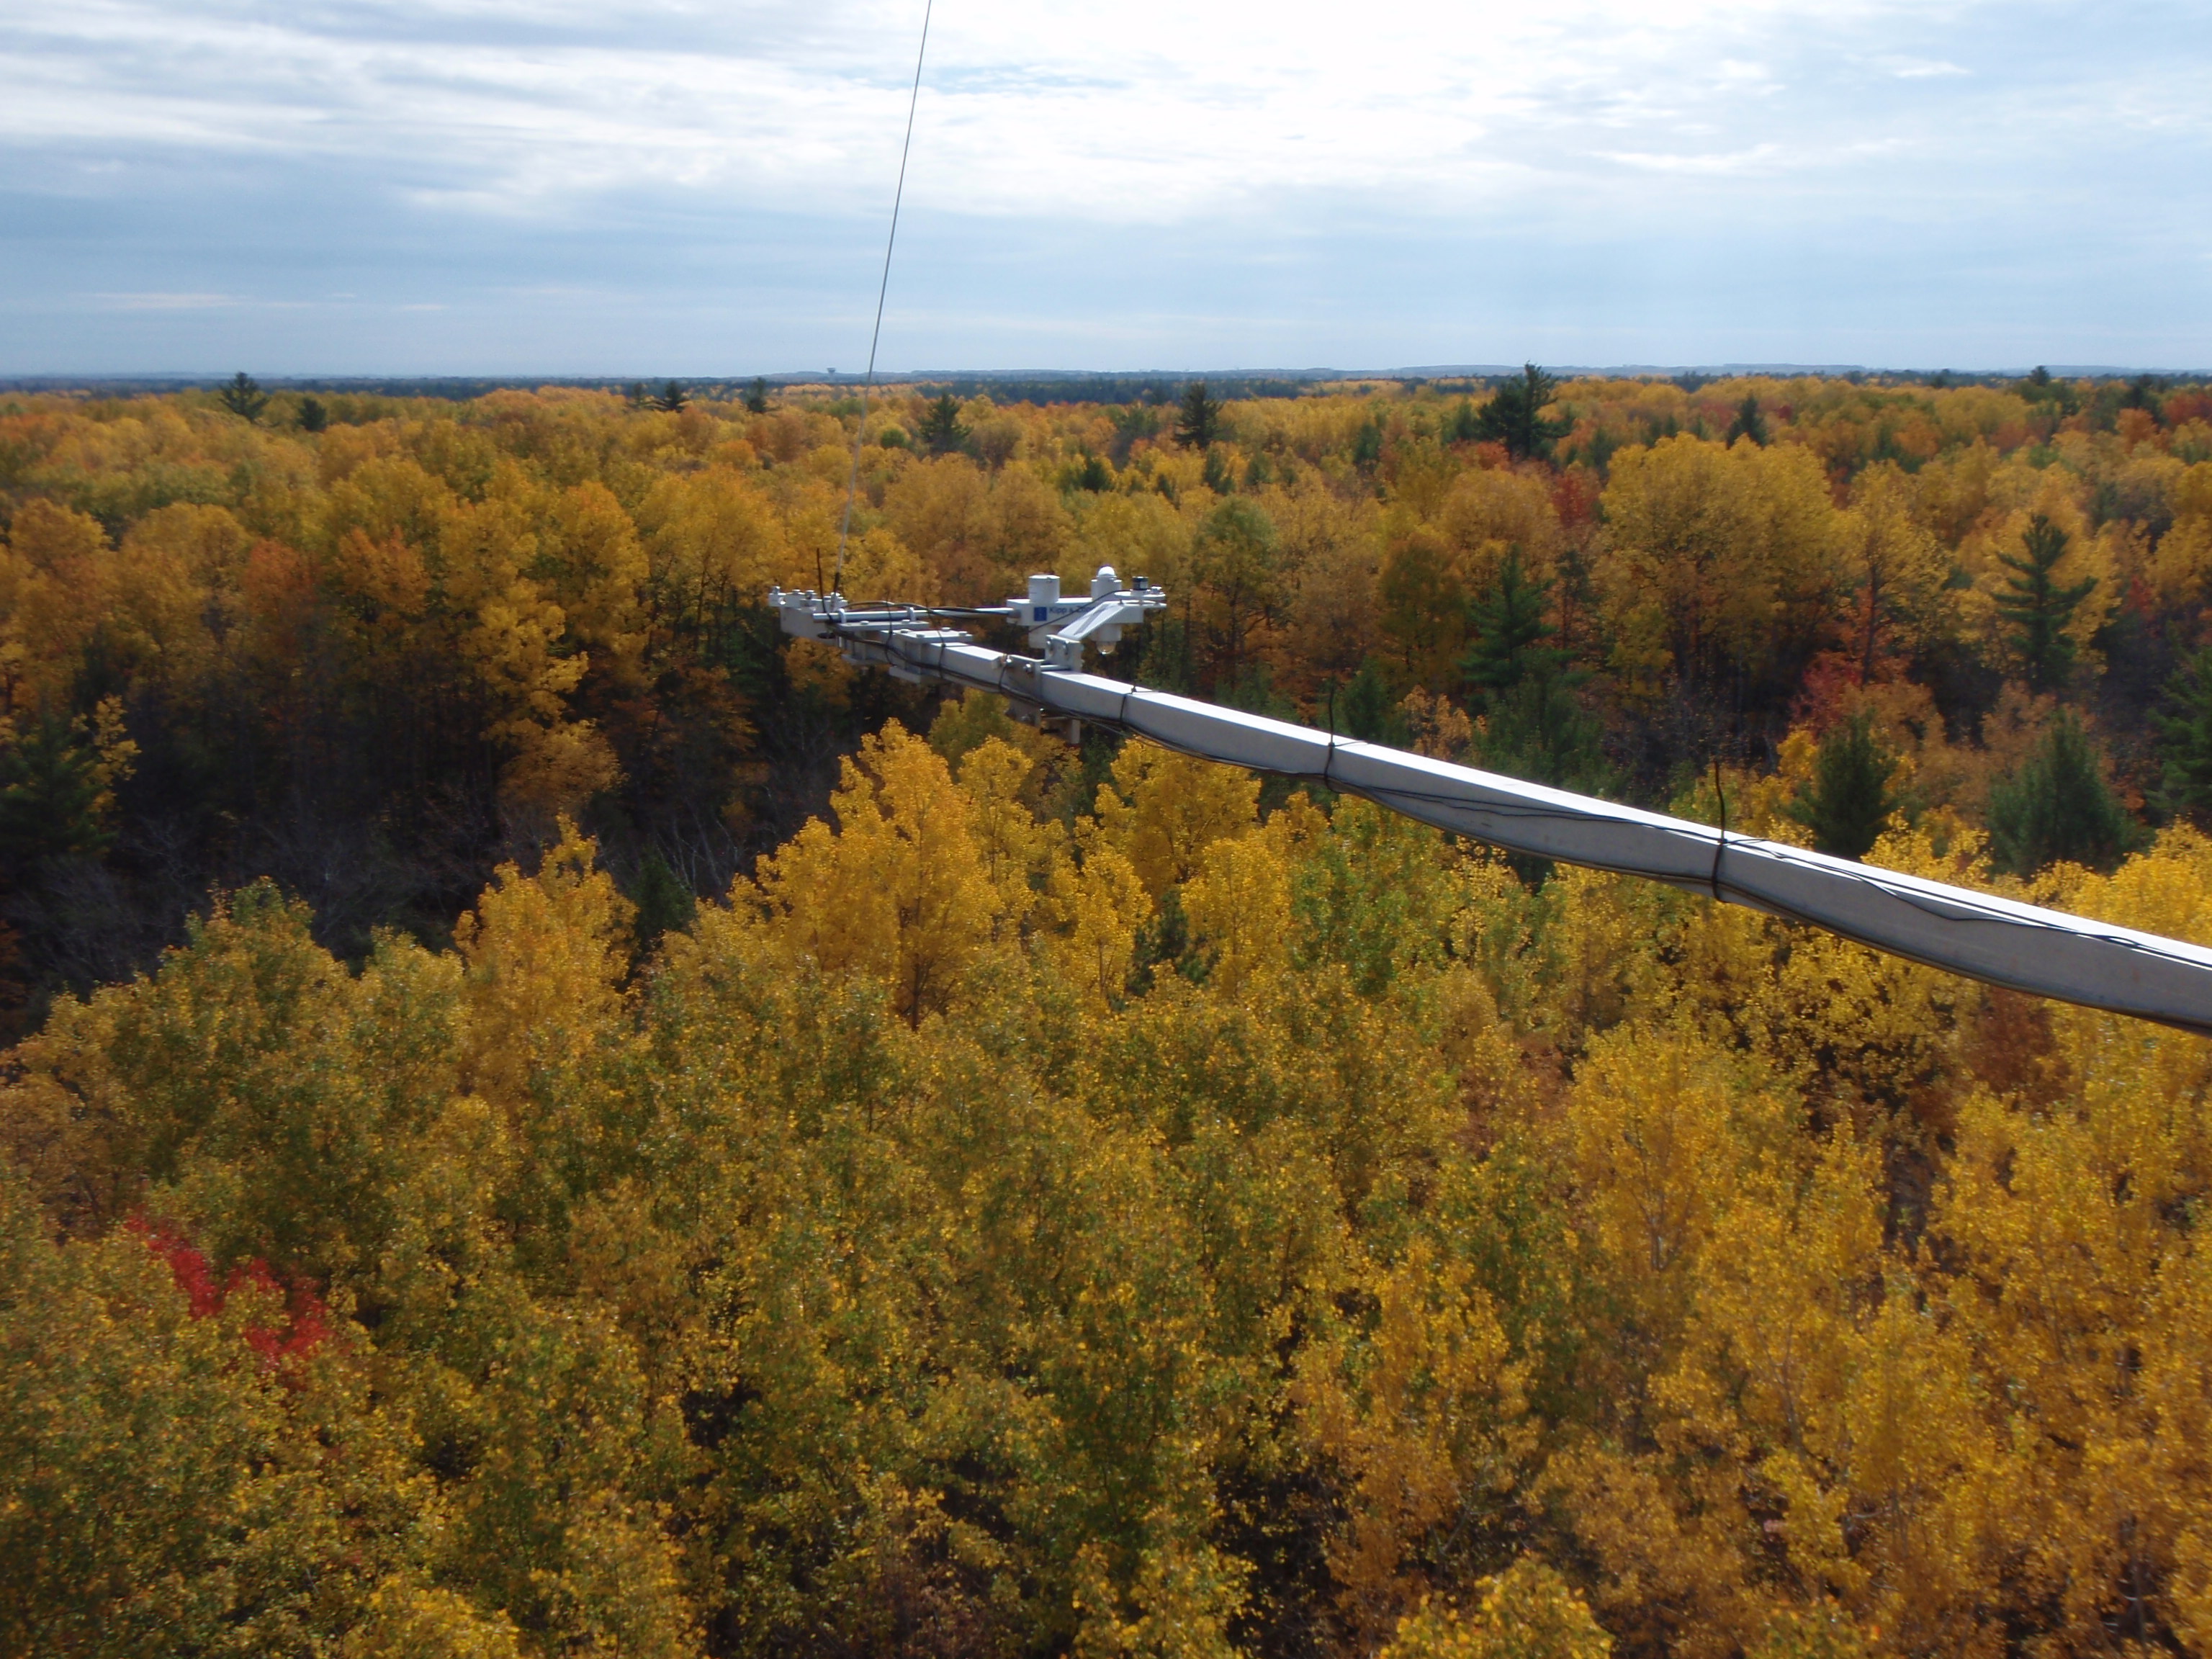 A 4-component radiometer, used to measure solar and thermal radiation above the forest.